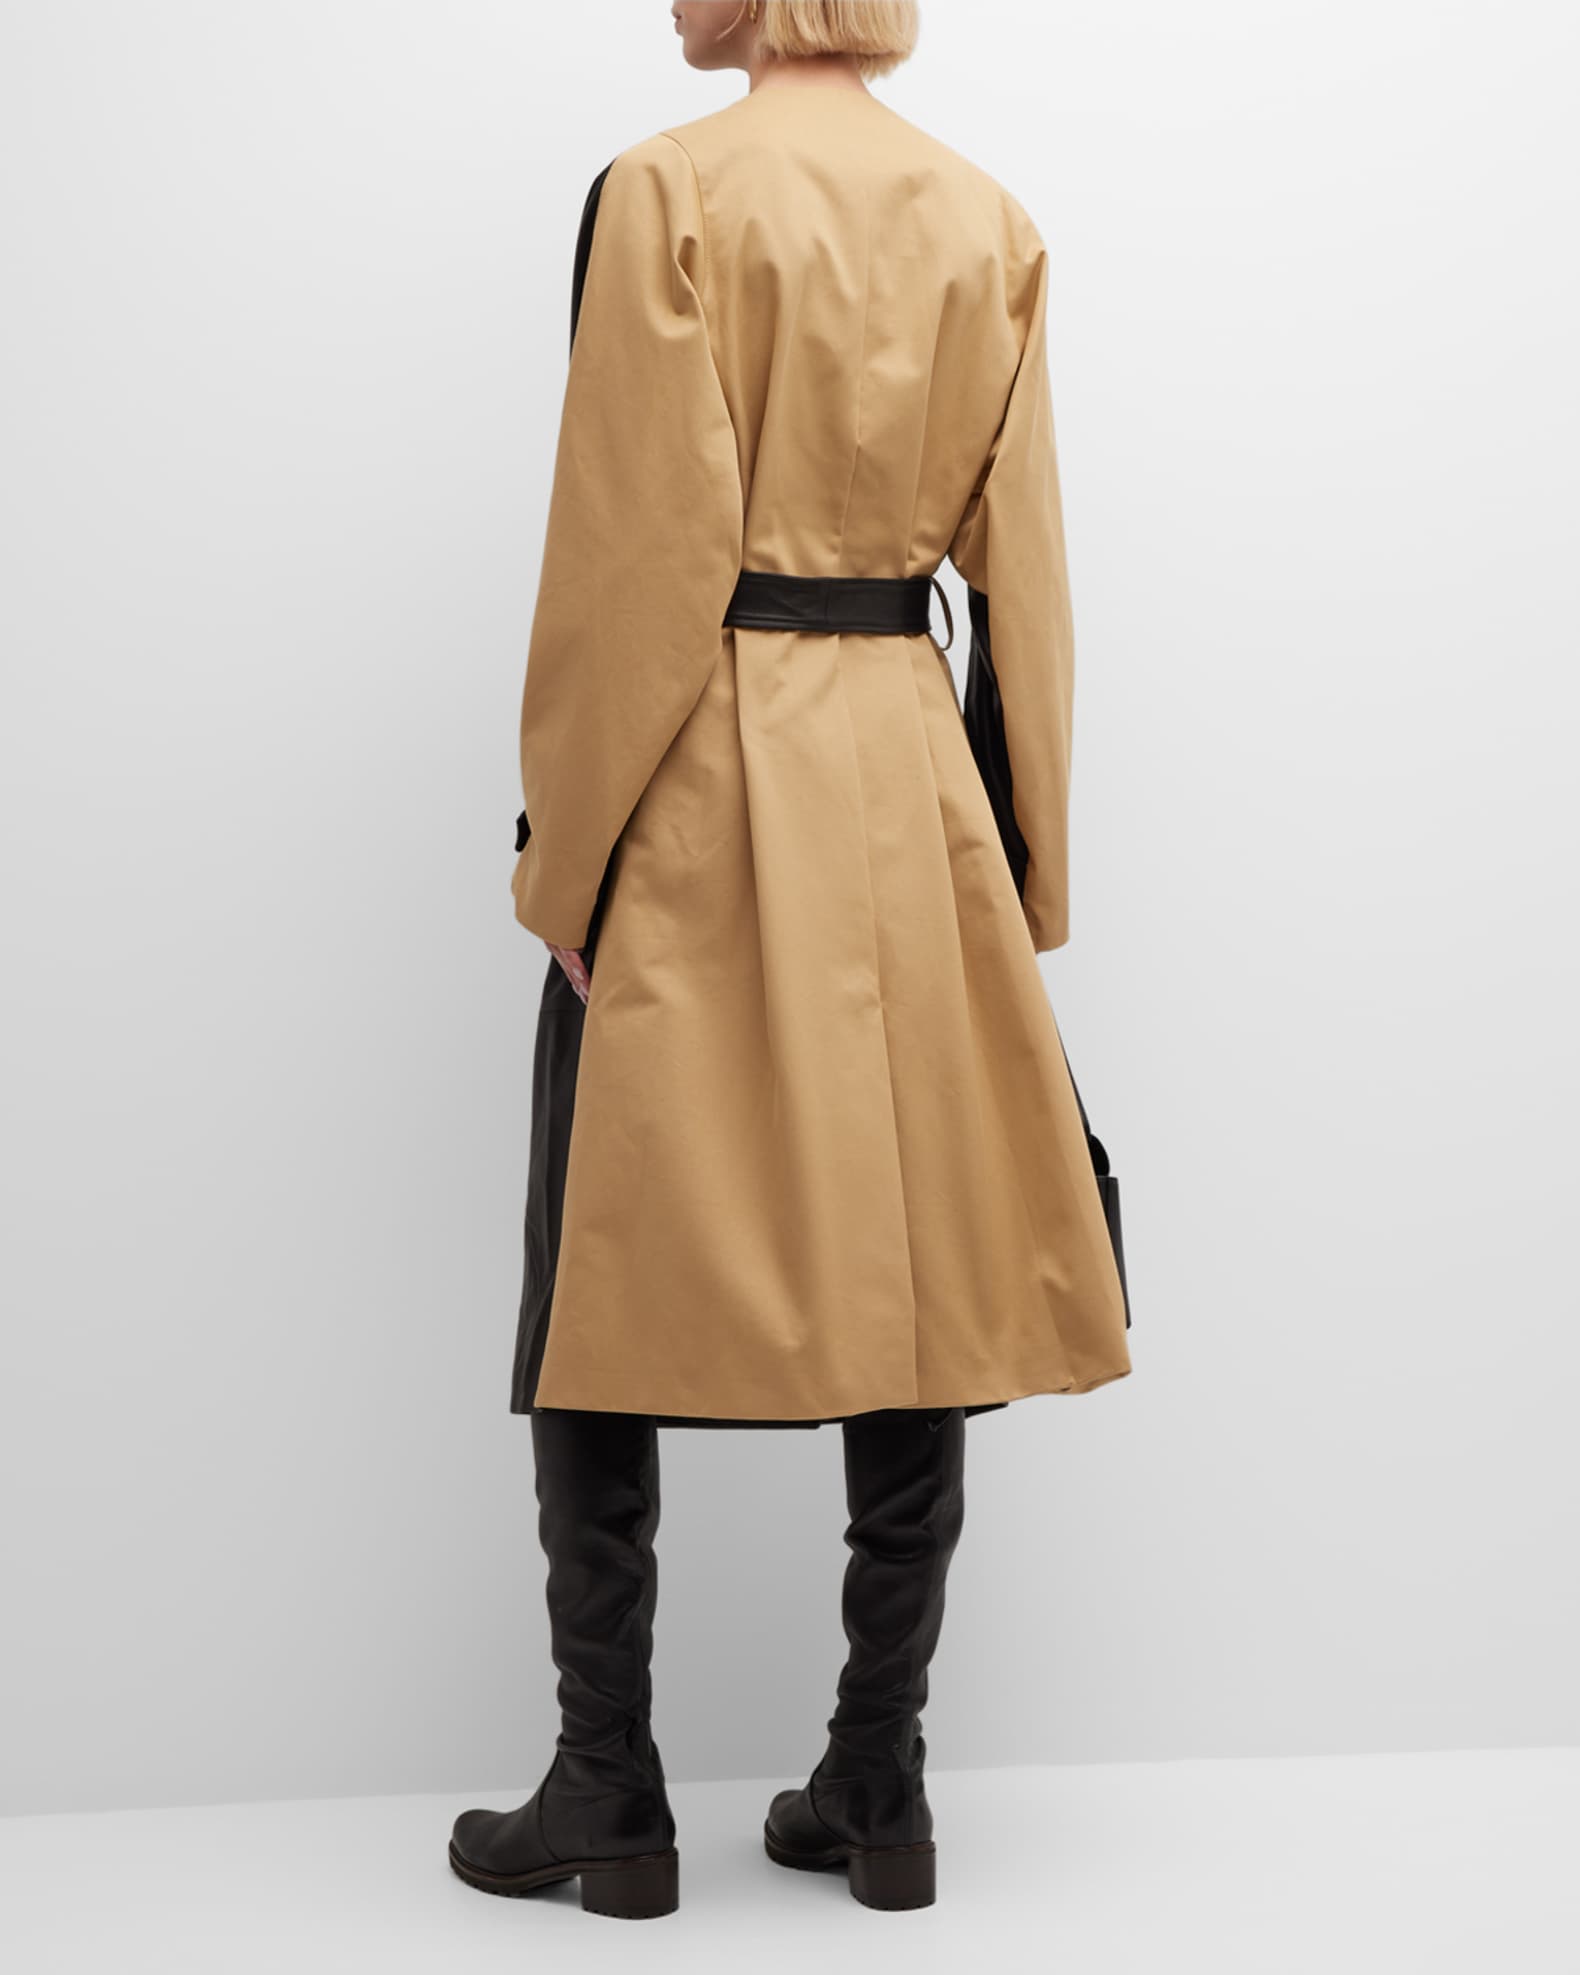 HALFBOY Bicolor Faux Leather Trench Coat with Belted Waist | Neiman Marcus